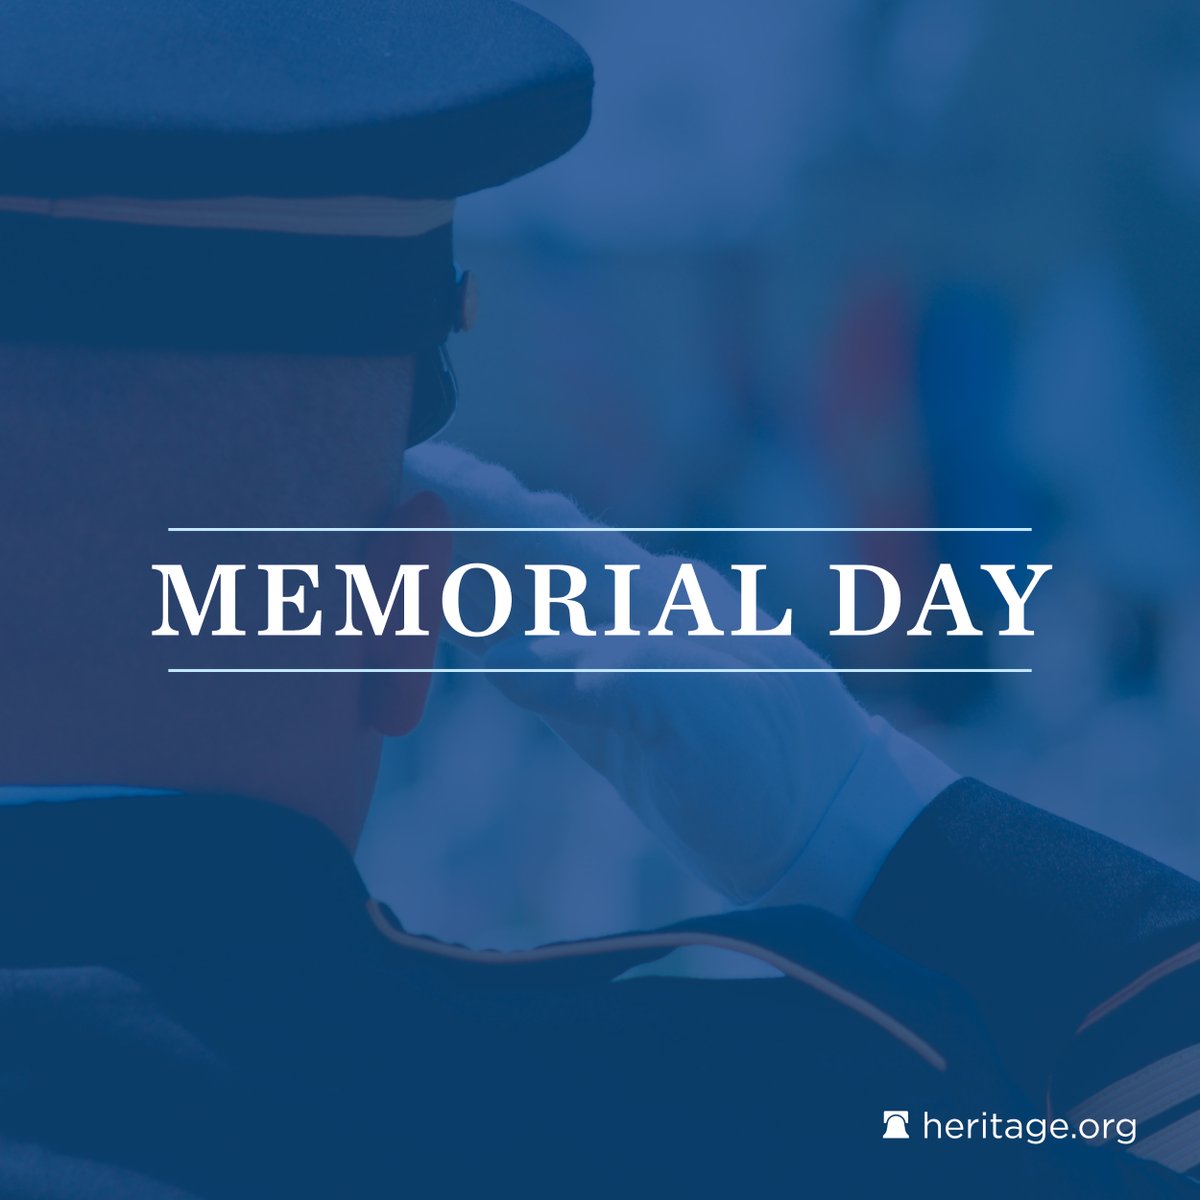 Today, we remember those who gave their lives for our freedom. May we never forget their incredible courage and sacrifice. #MemorialDay